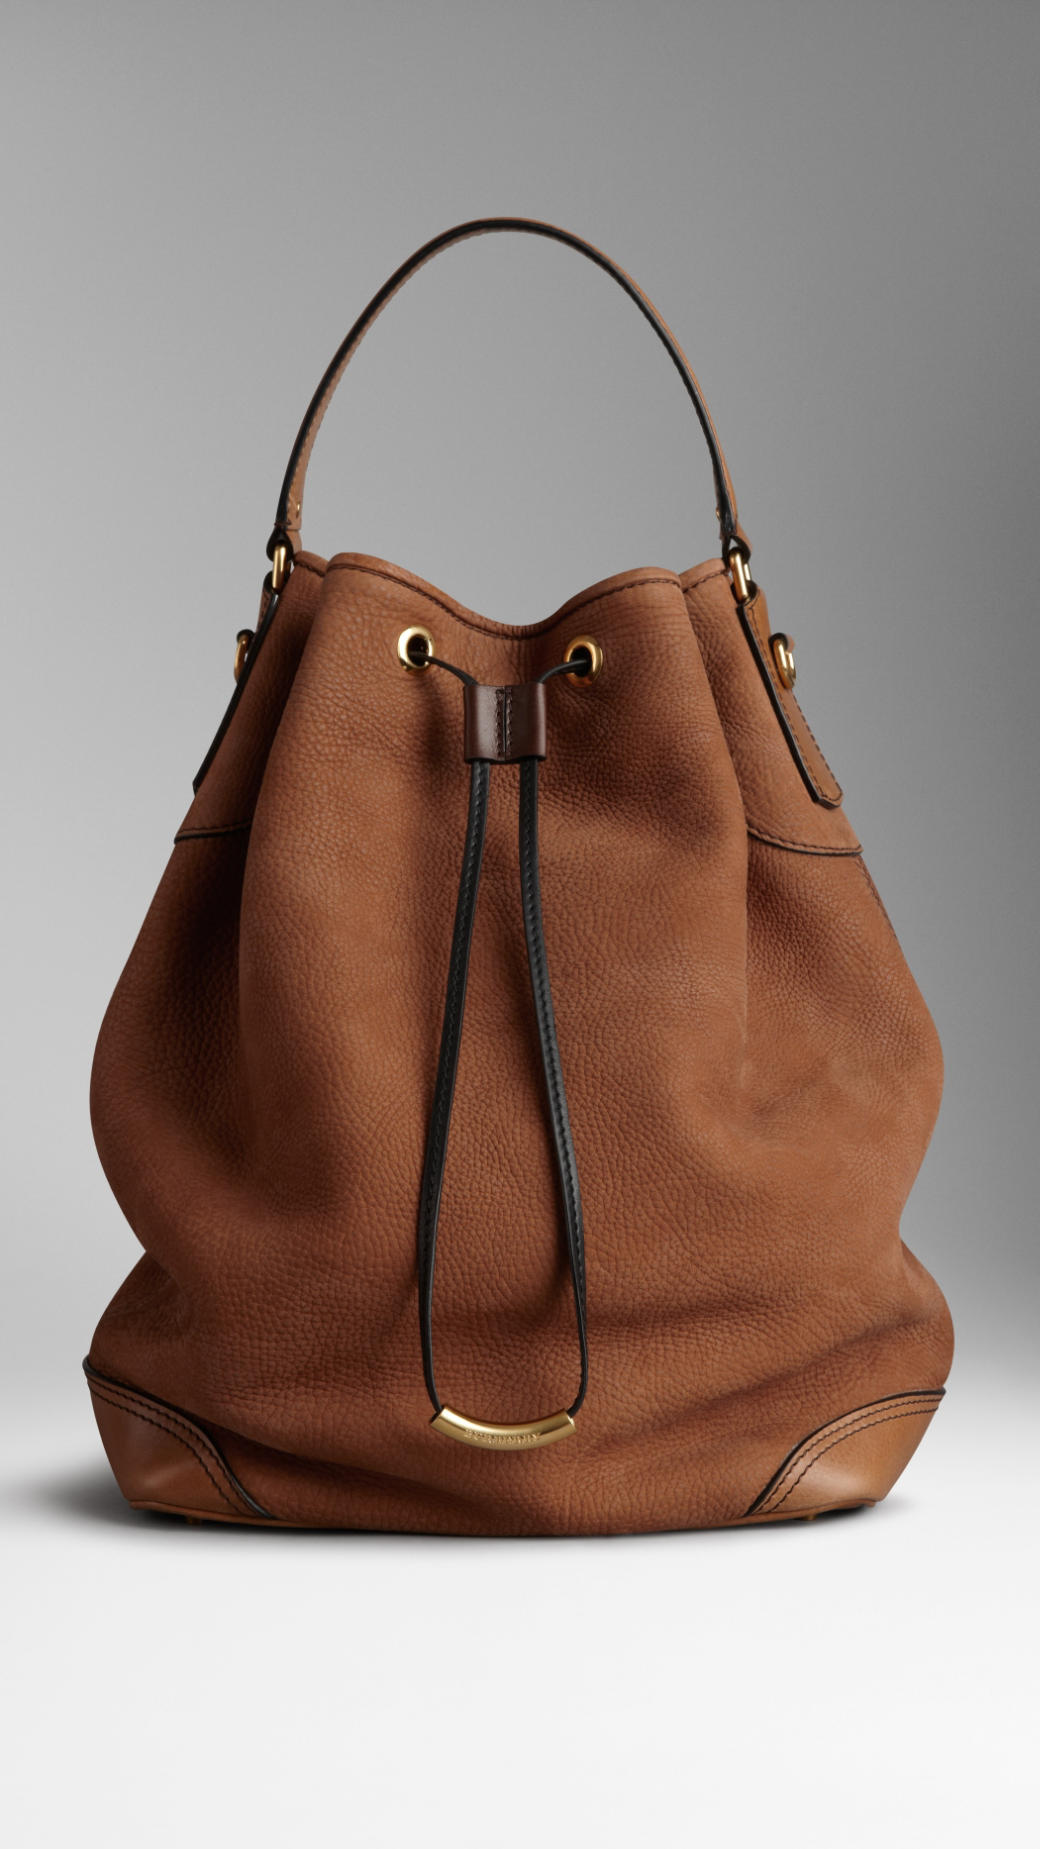 Burberry Large Nubuck Leather Hobo Bag in Bright Toffee (Brown) - Lyst